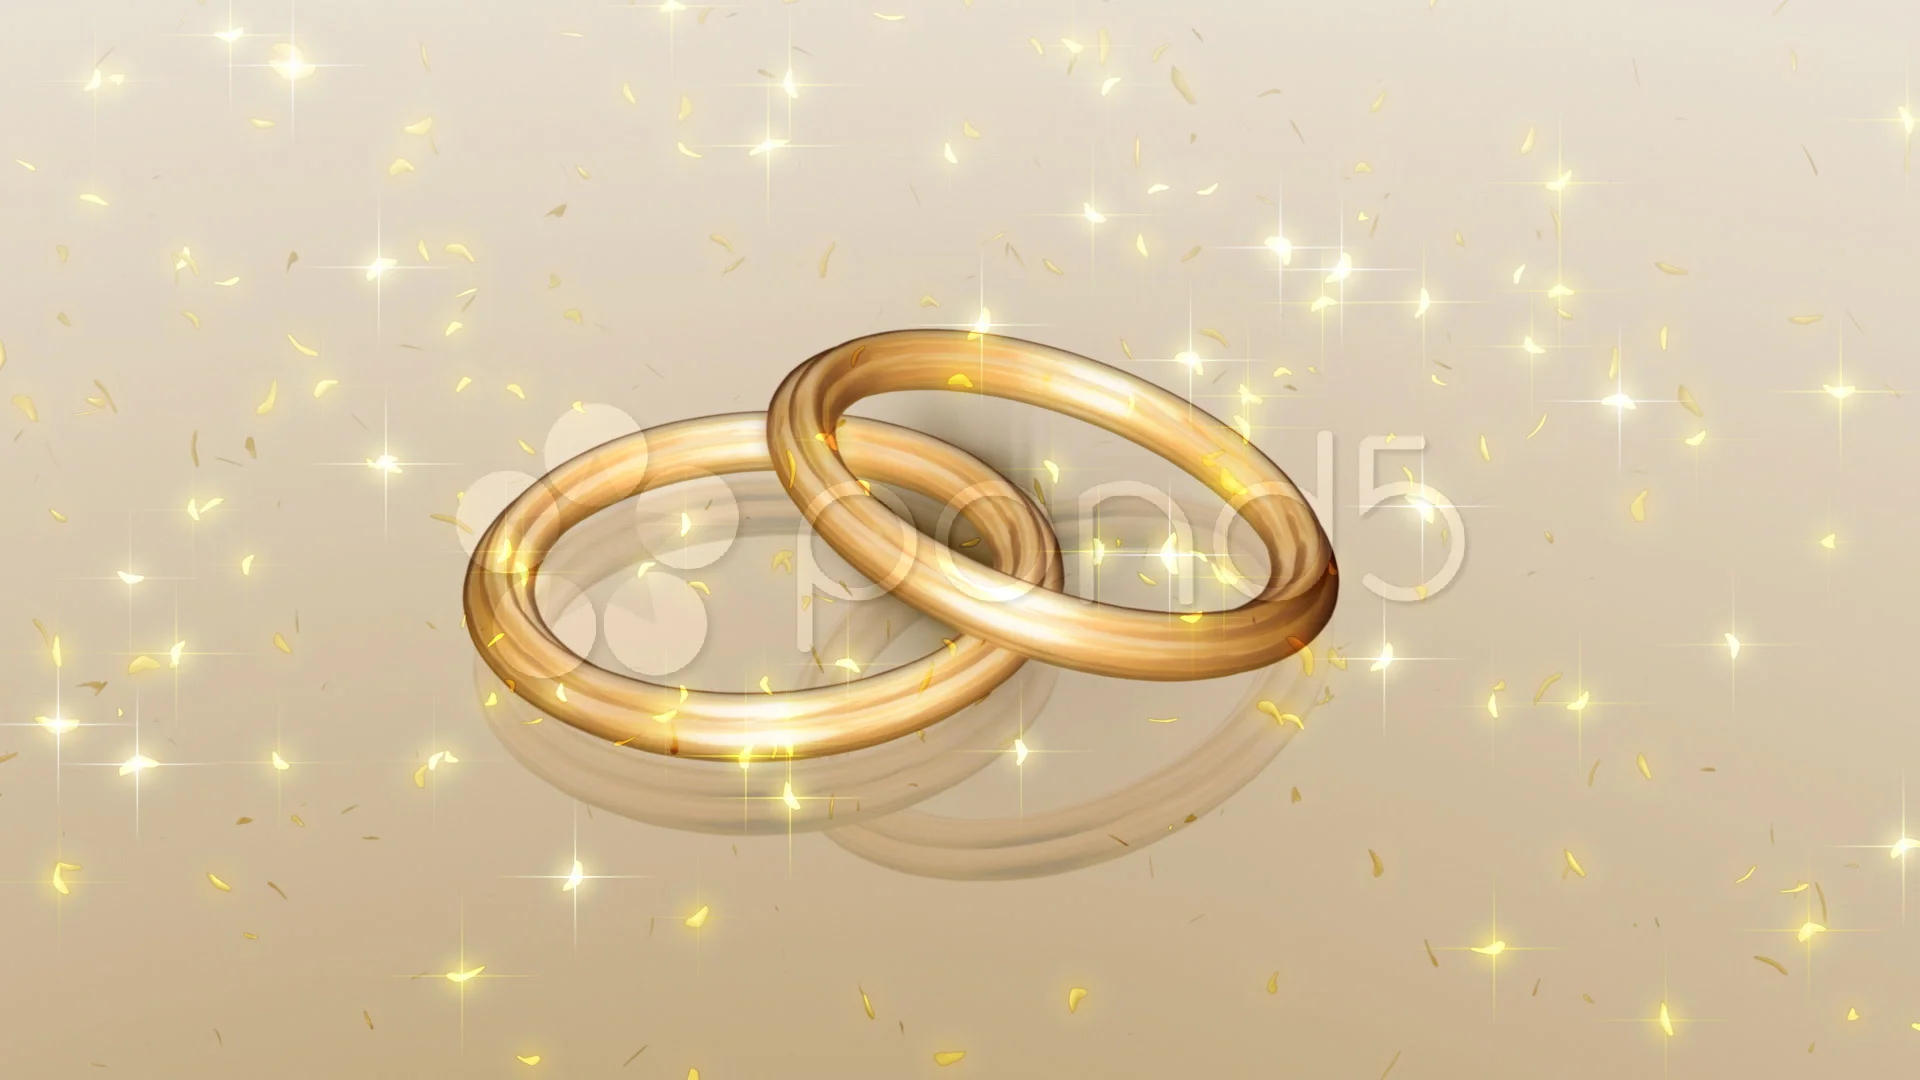 Premium Photo | Romantic gold wedding rings on sparkling background with  copy space for an invitation or greeting ca